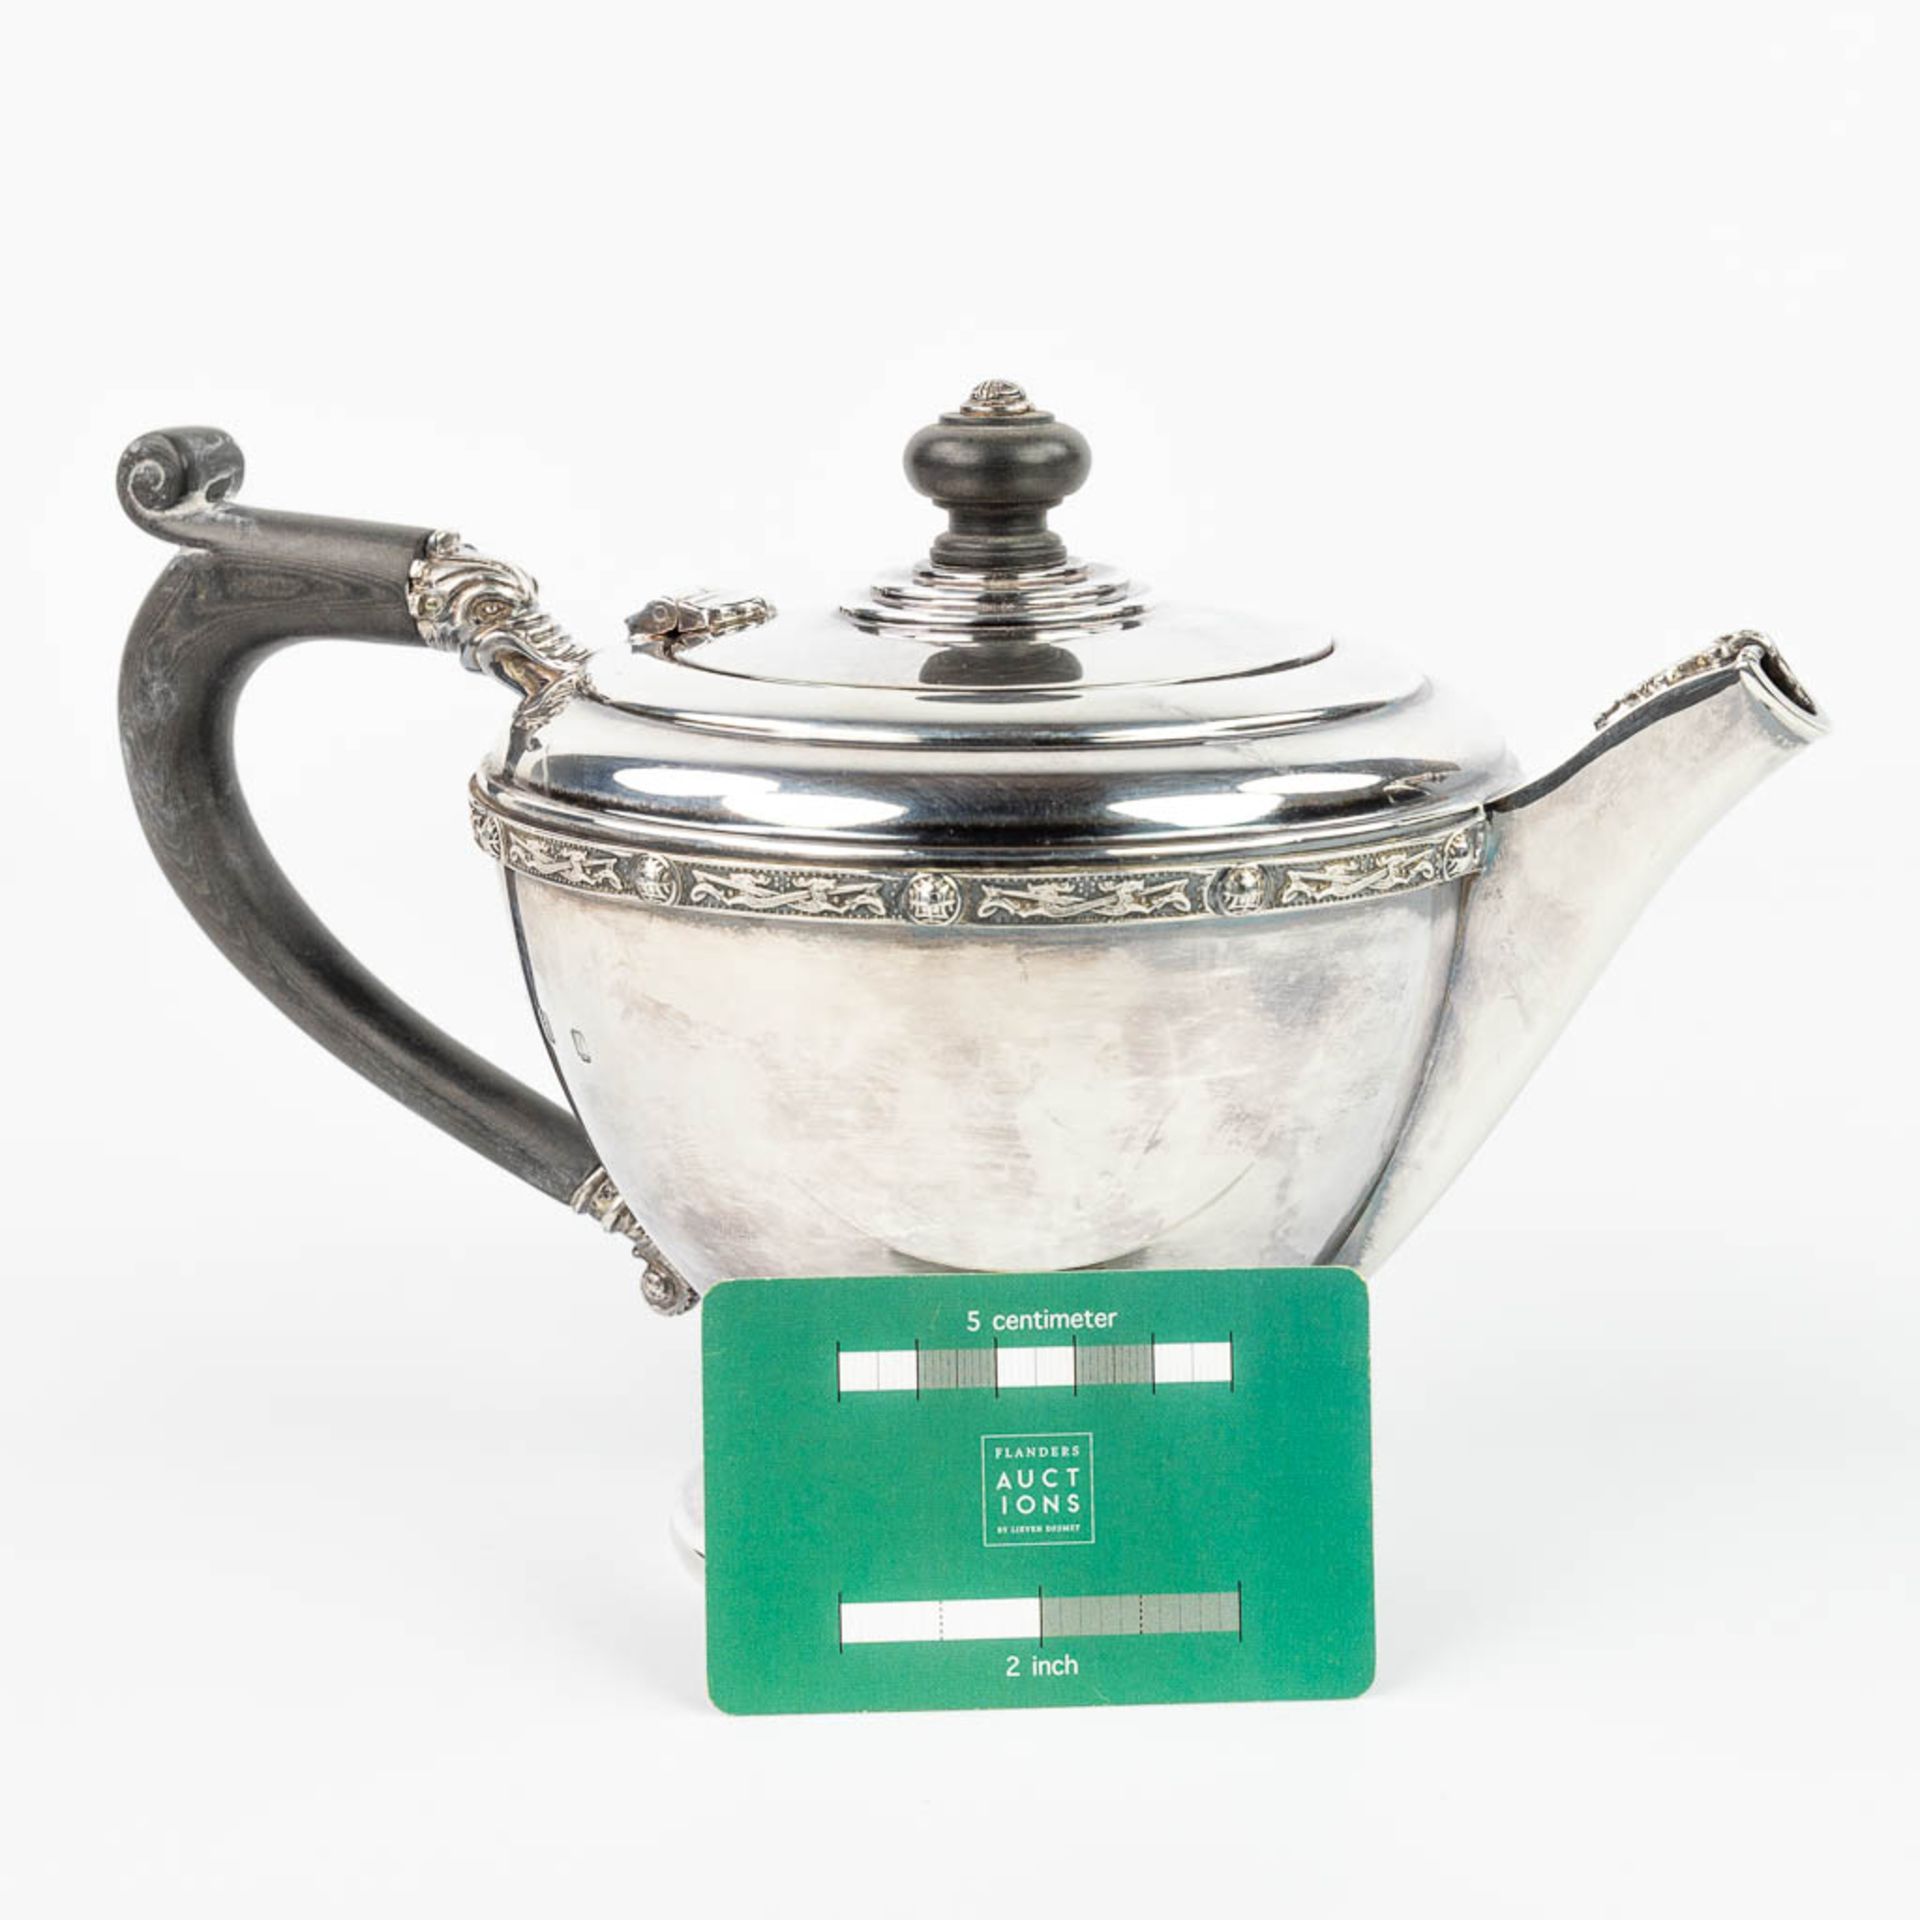 A fine silver teapot with ebony handles and made in Ireland, 1977. (H:16,5cm) - Image 2 of 18